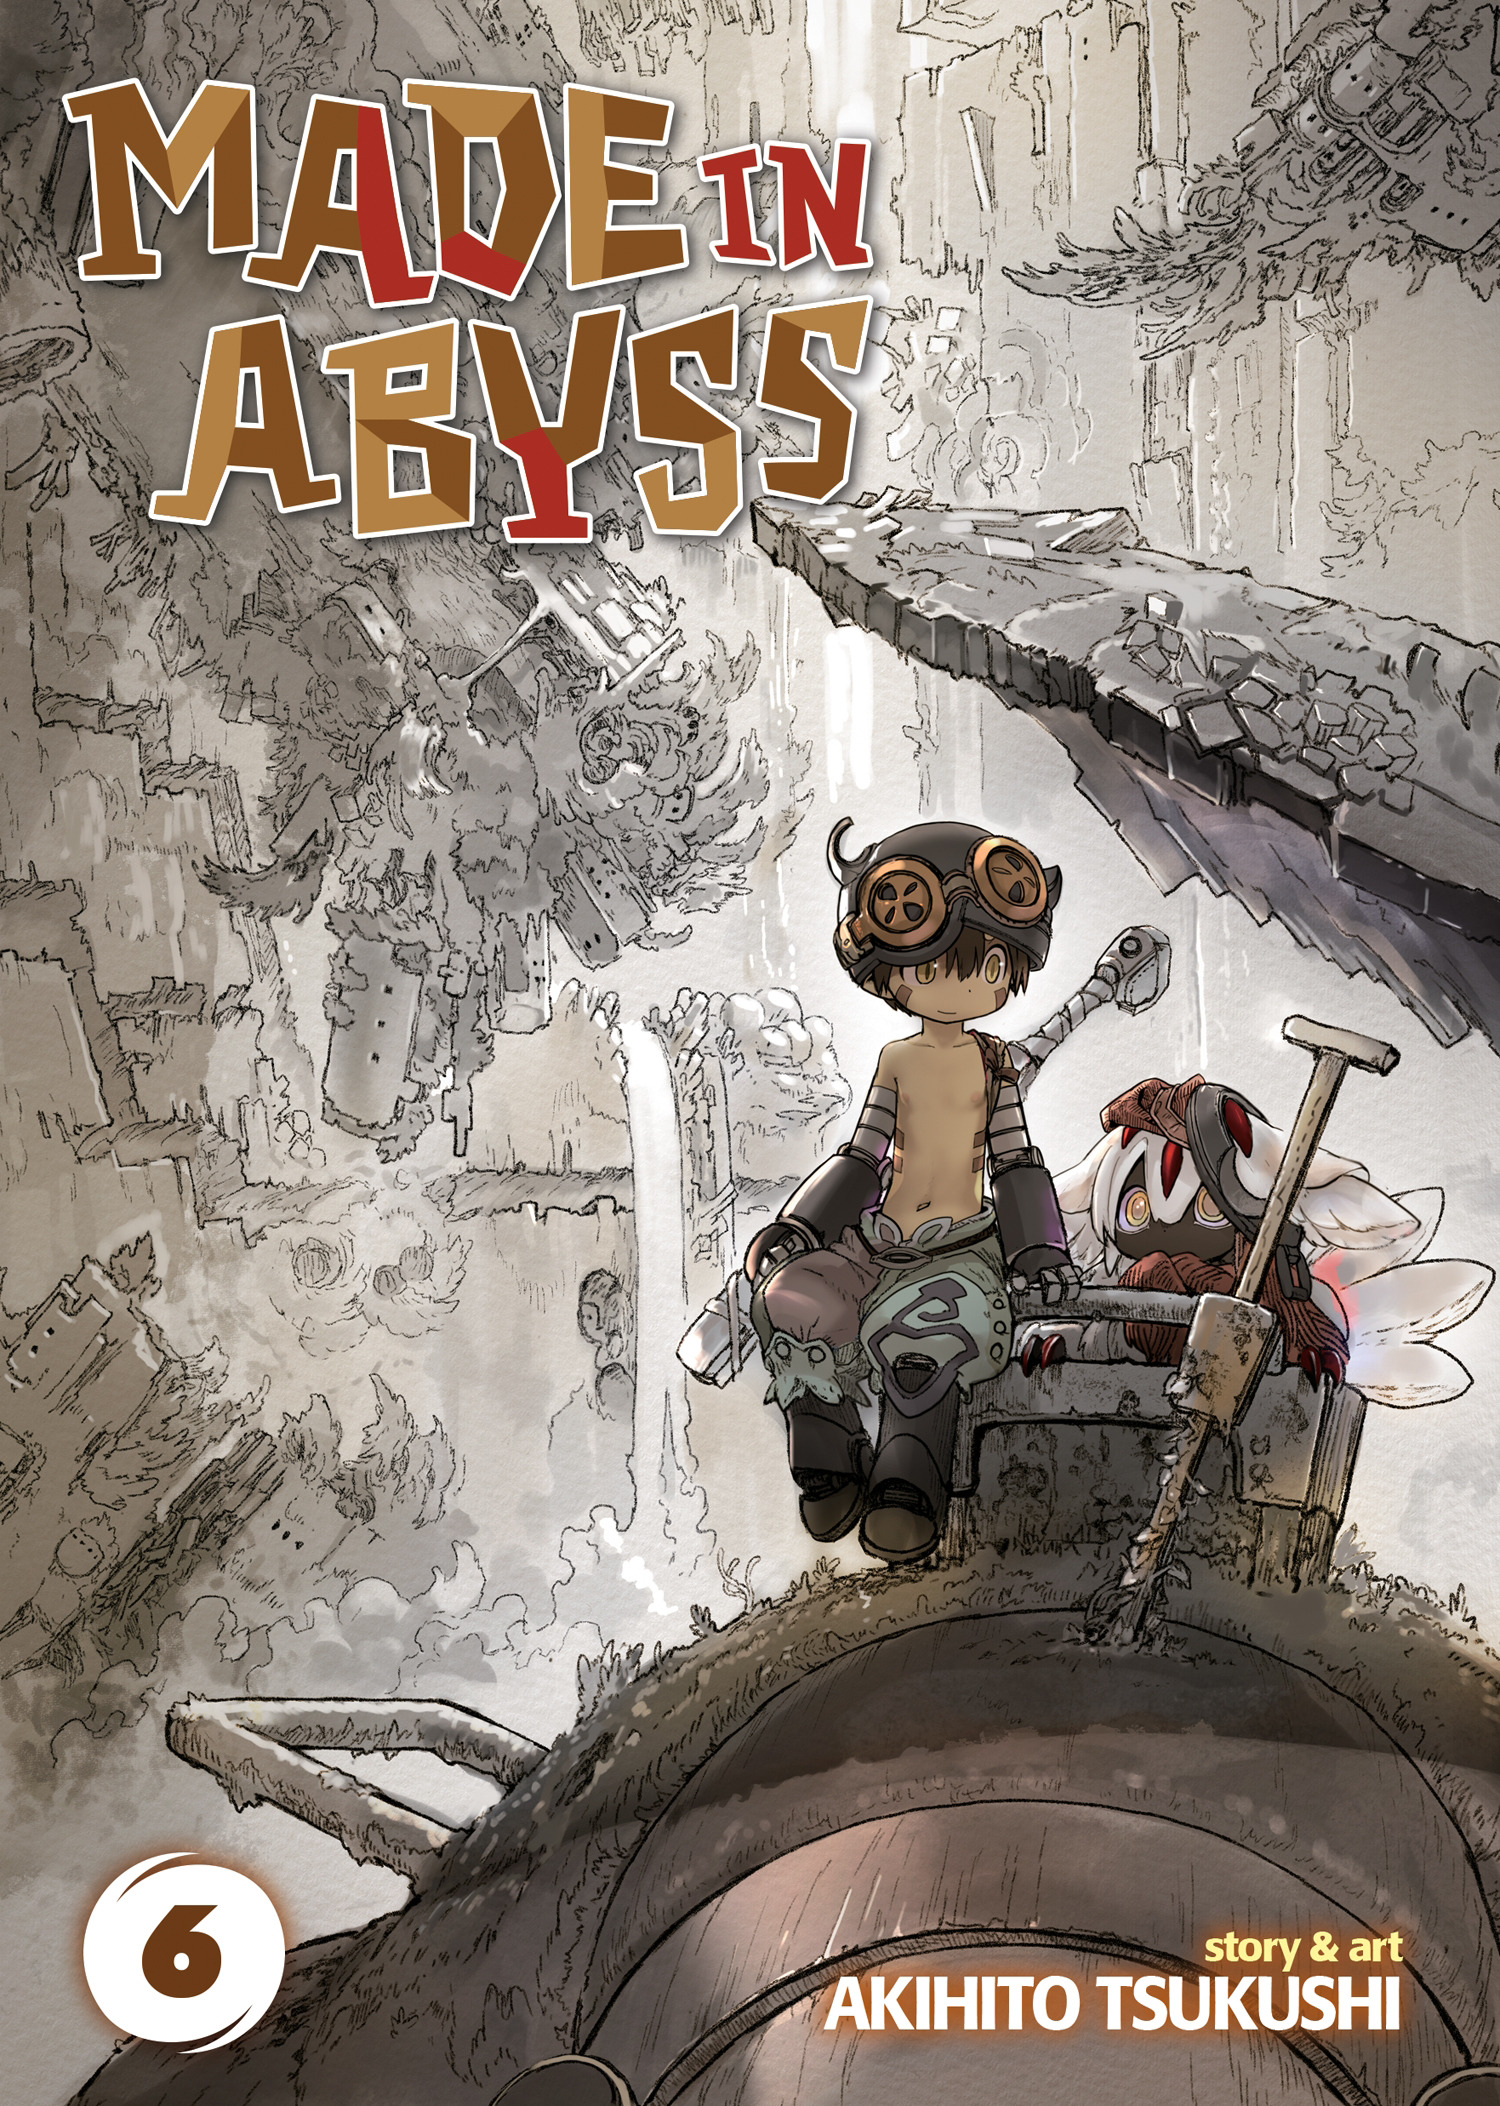 Made in Abyss Vol. 6 | Tsukushi, Akihito (Auteur)